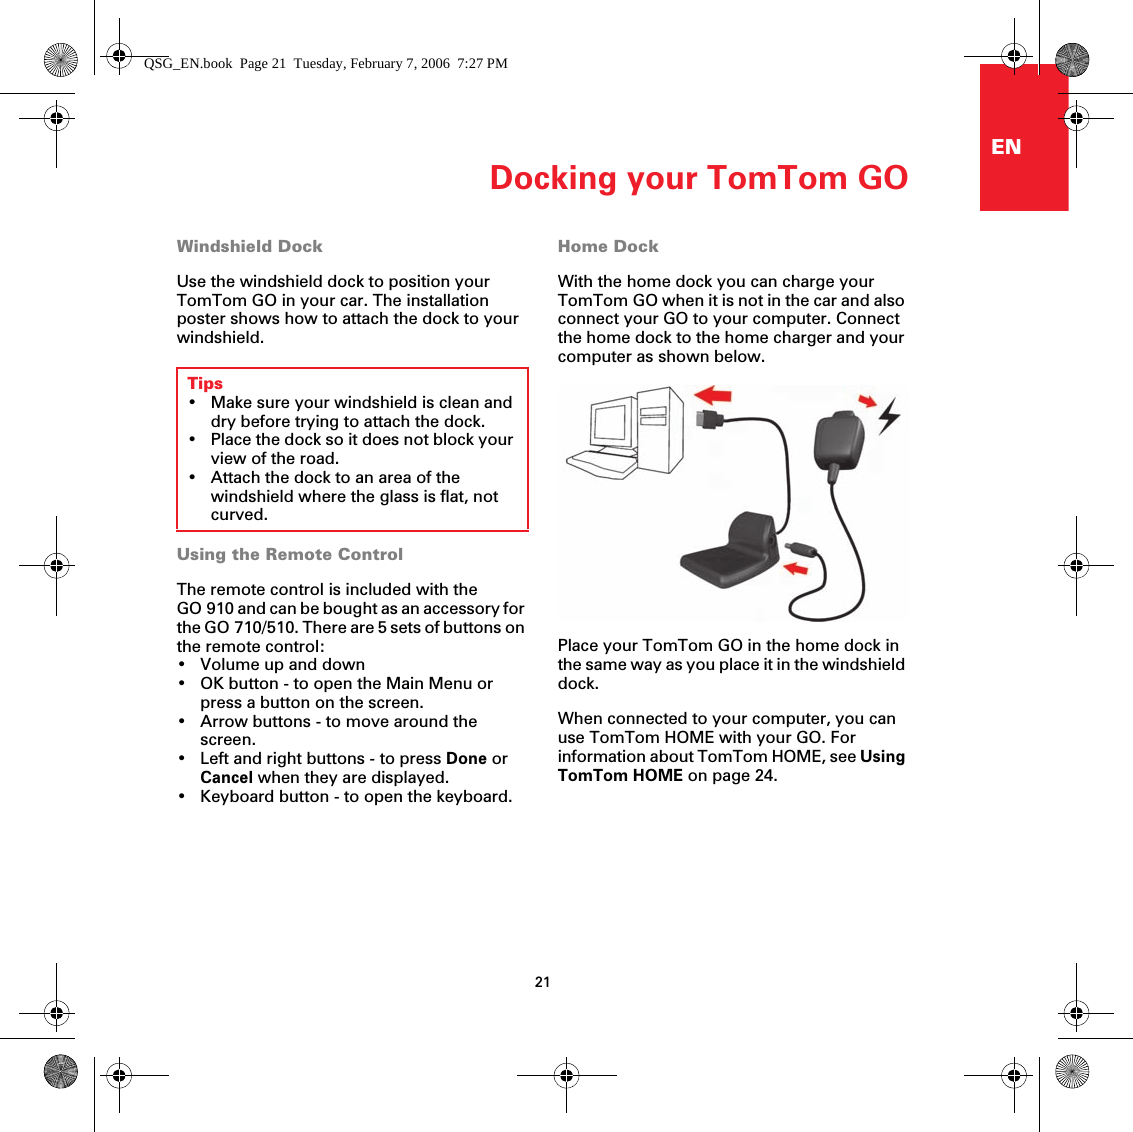 Docking your TomTom GO21ENDocking your TomTomGO Windshield DockUse the windshield dock to position your TomTom GO in your car. The installation poster shows how to attach the dock to your windshield. Using the Remote ControlThe remote control is included with the GO 910 and can be bought as an accessory for the GO 710/510. There are 5 sets of buttons on the remote control:• Volume up and down• OK button - to open the Main Menu or press a button on the screen.• Arrow buttons - to move around the screen.• Left and right buttons - to press Done or Cancel when they are displayed.• Keyboard button - to open the keyboard.Home DockWith the home dock you can charge your TomTom GO when it is not in the car and also connect your GO to your computer. Connect the home dock to the home charger and your computer as shown below.Place your TomTom GO in the home dock in the same way as you place it in the windshield dock. When connected to your computer, you can use TomTom HOME with your GO. For information about TomTom HOME, see Using TomTom HOME on page 24.Tips• Make sure your windshield is clean and dry before trying to attach the dock.• Place the dock so it does not block your view of the road.• Attach the dock to an area of the windshield where the glass is flat, not curved.QSG_EN.book  Page 21  Tuesday, February 7, 2006  7:27 PM